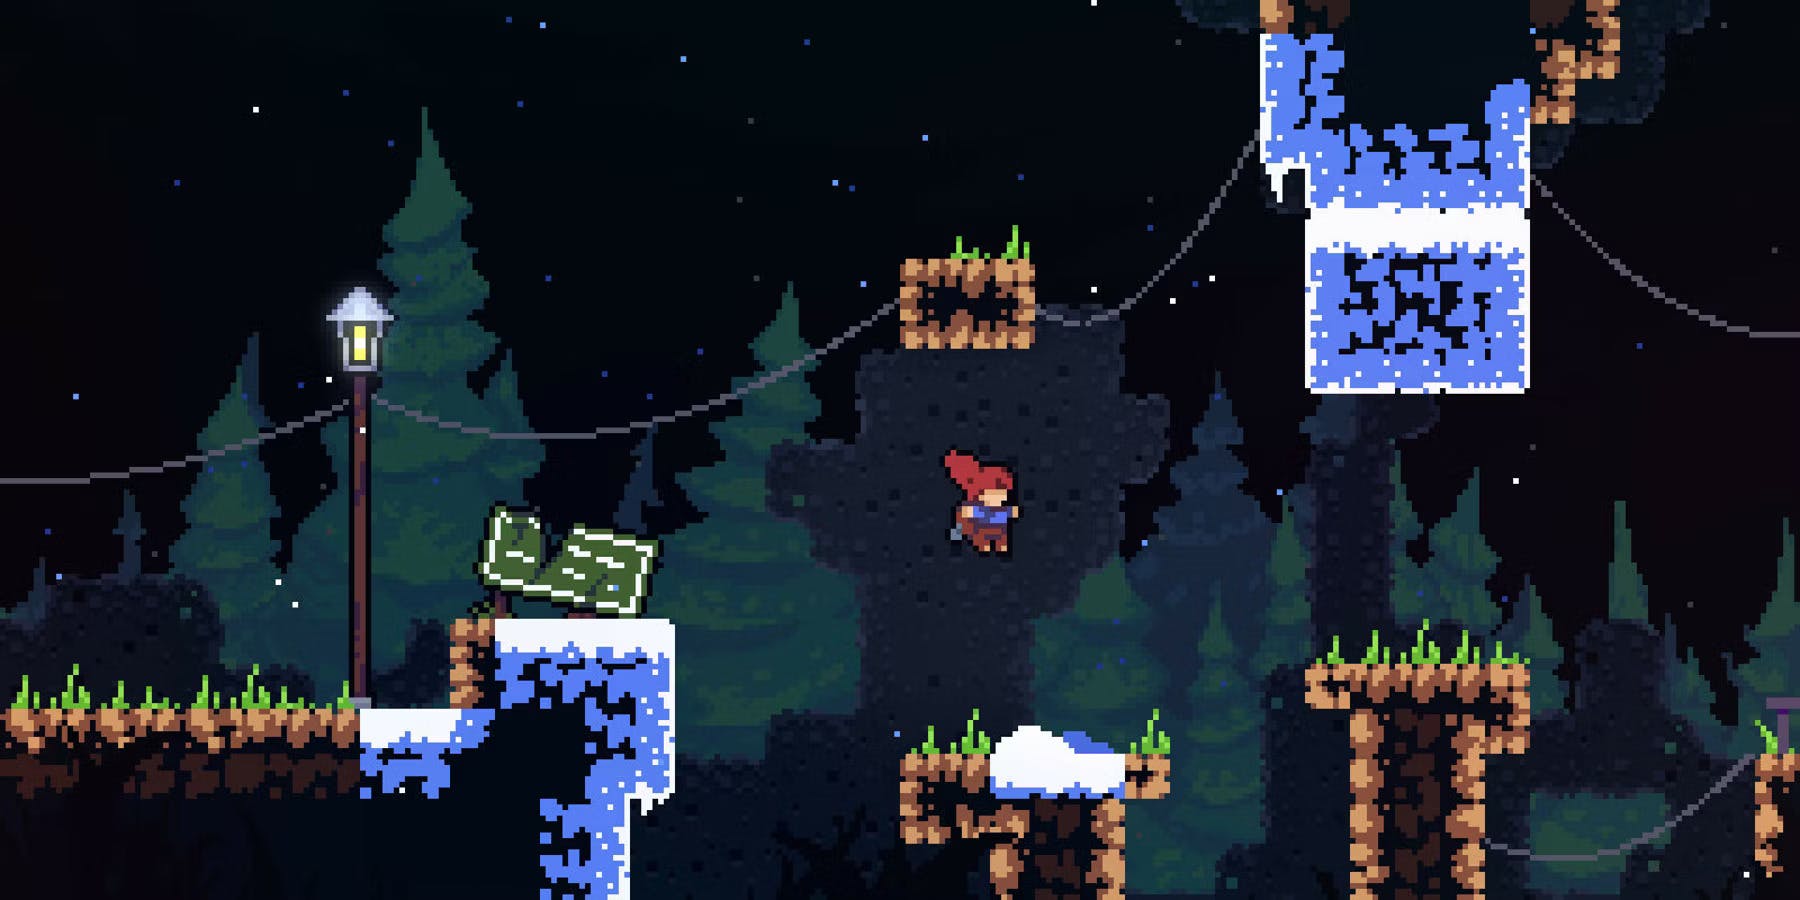 Jumping in the video game Celeste